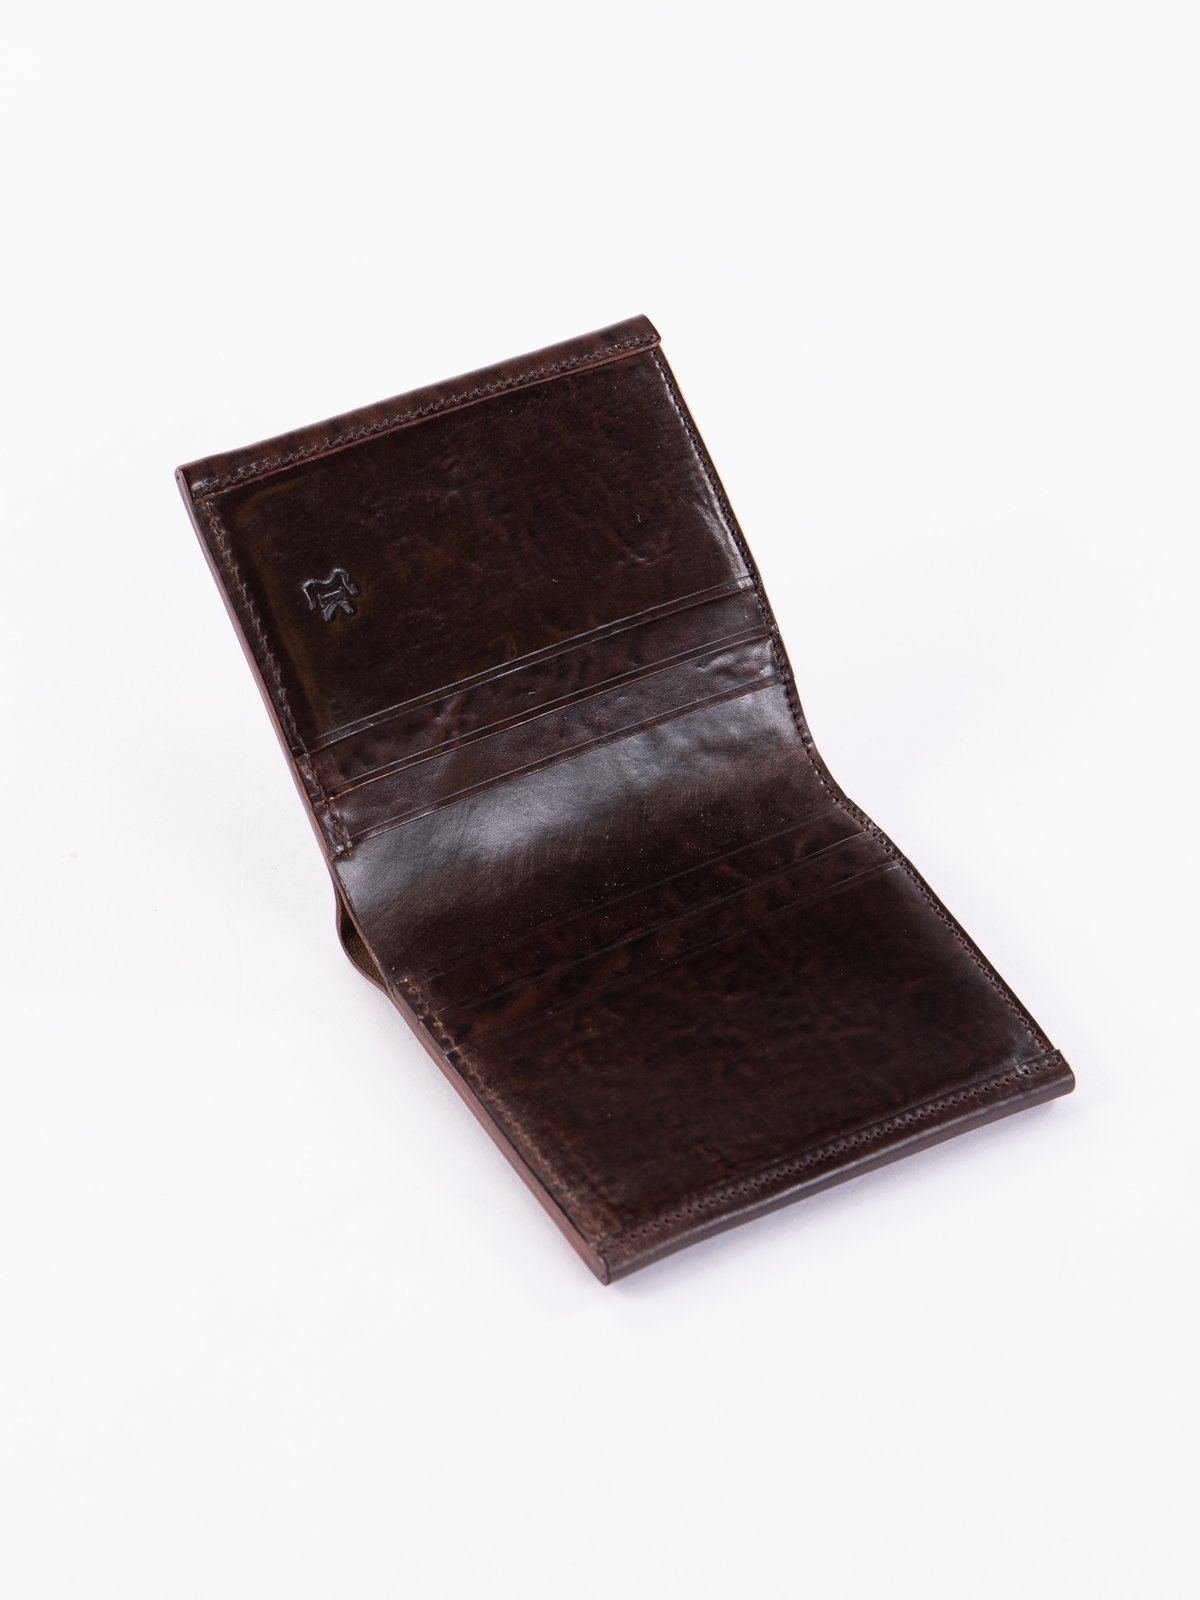 Tumbled Color 8 Horween Cordovan 3–3 Wallet - Image 2